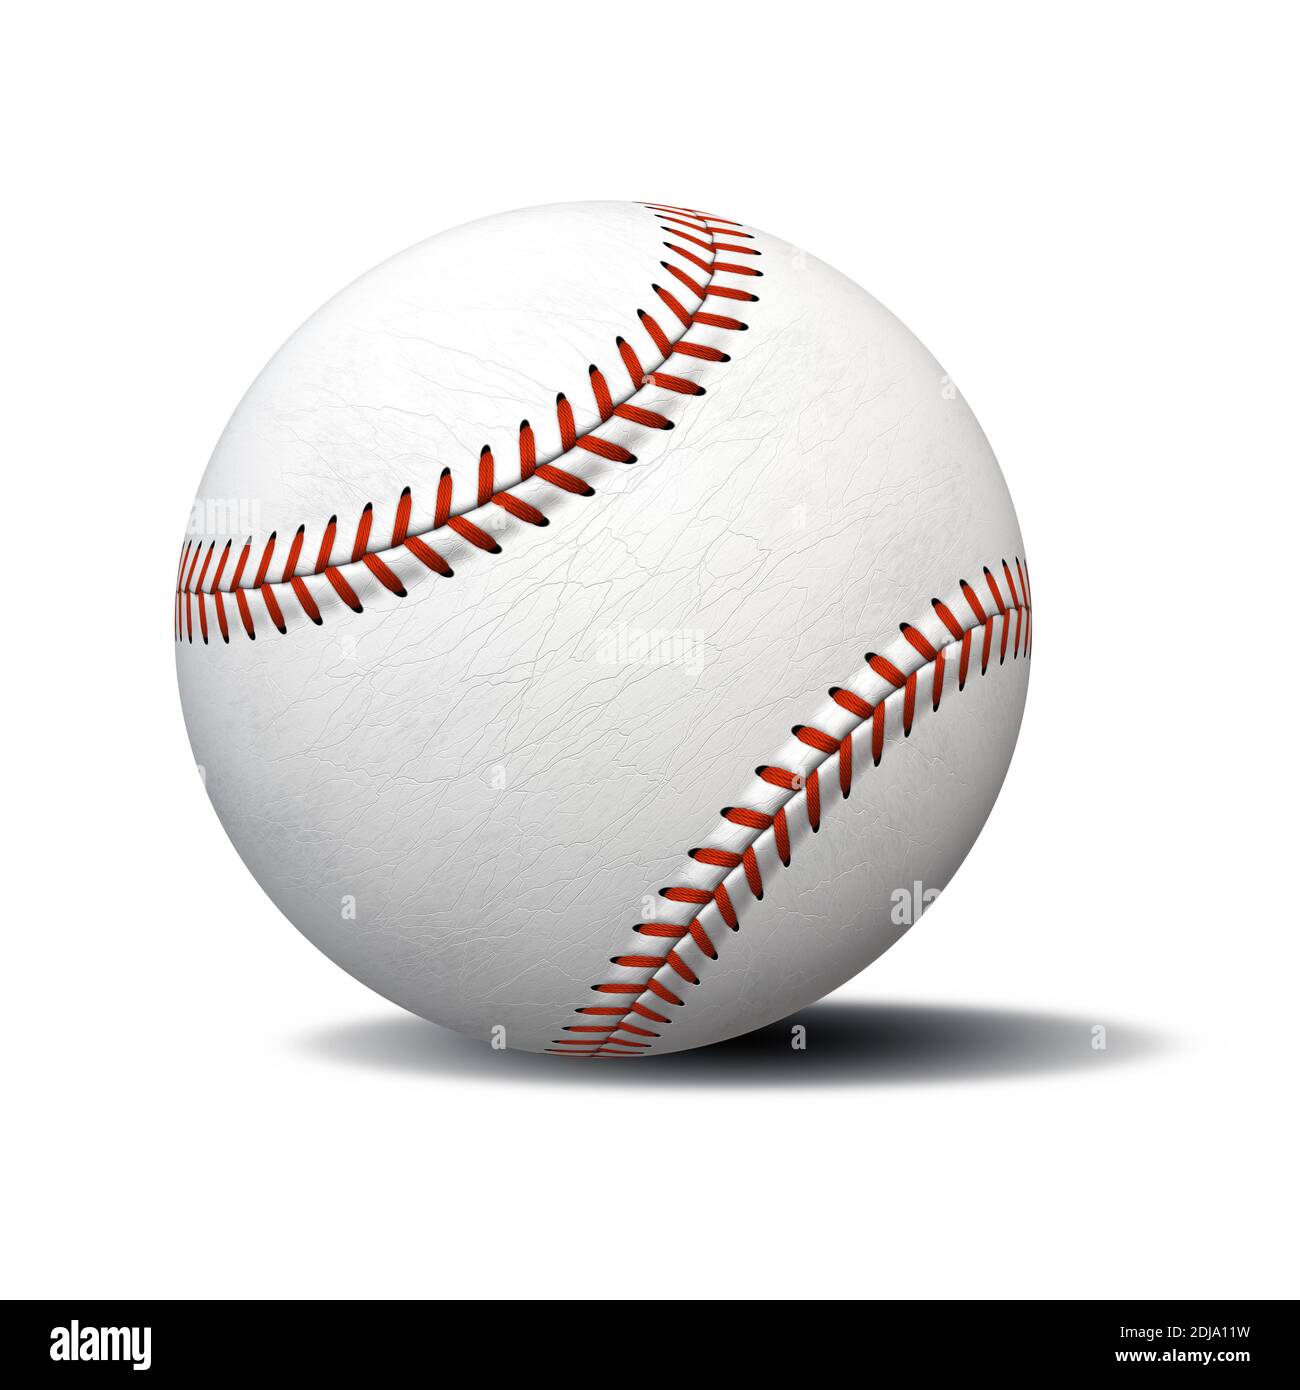 2d illustration of a typical white baseball Stock Photo